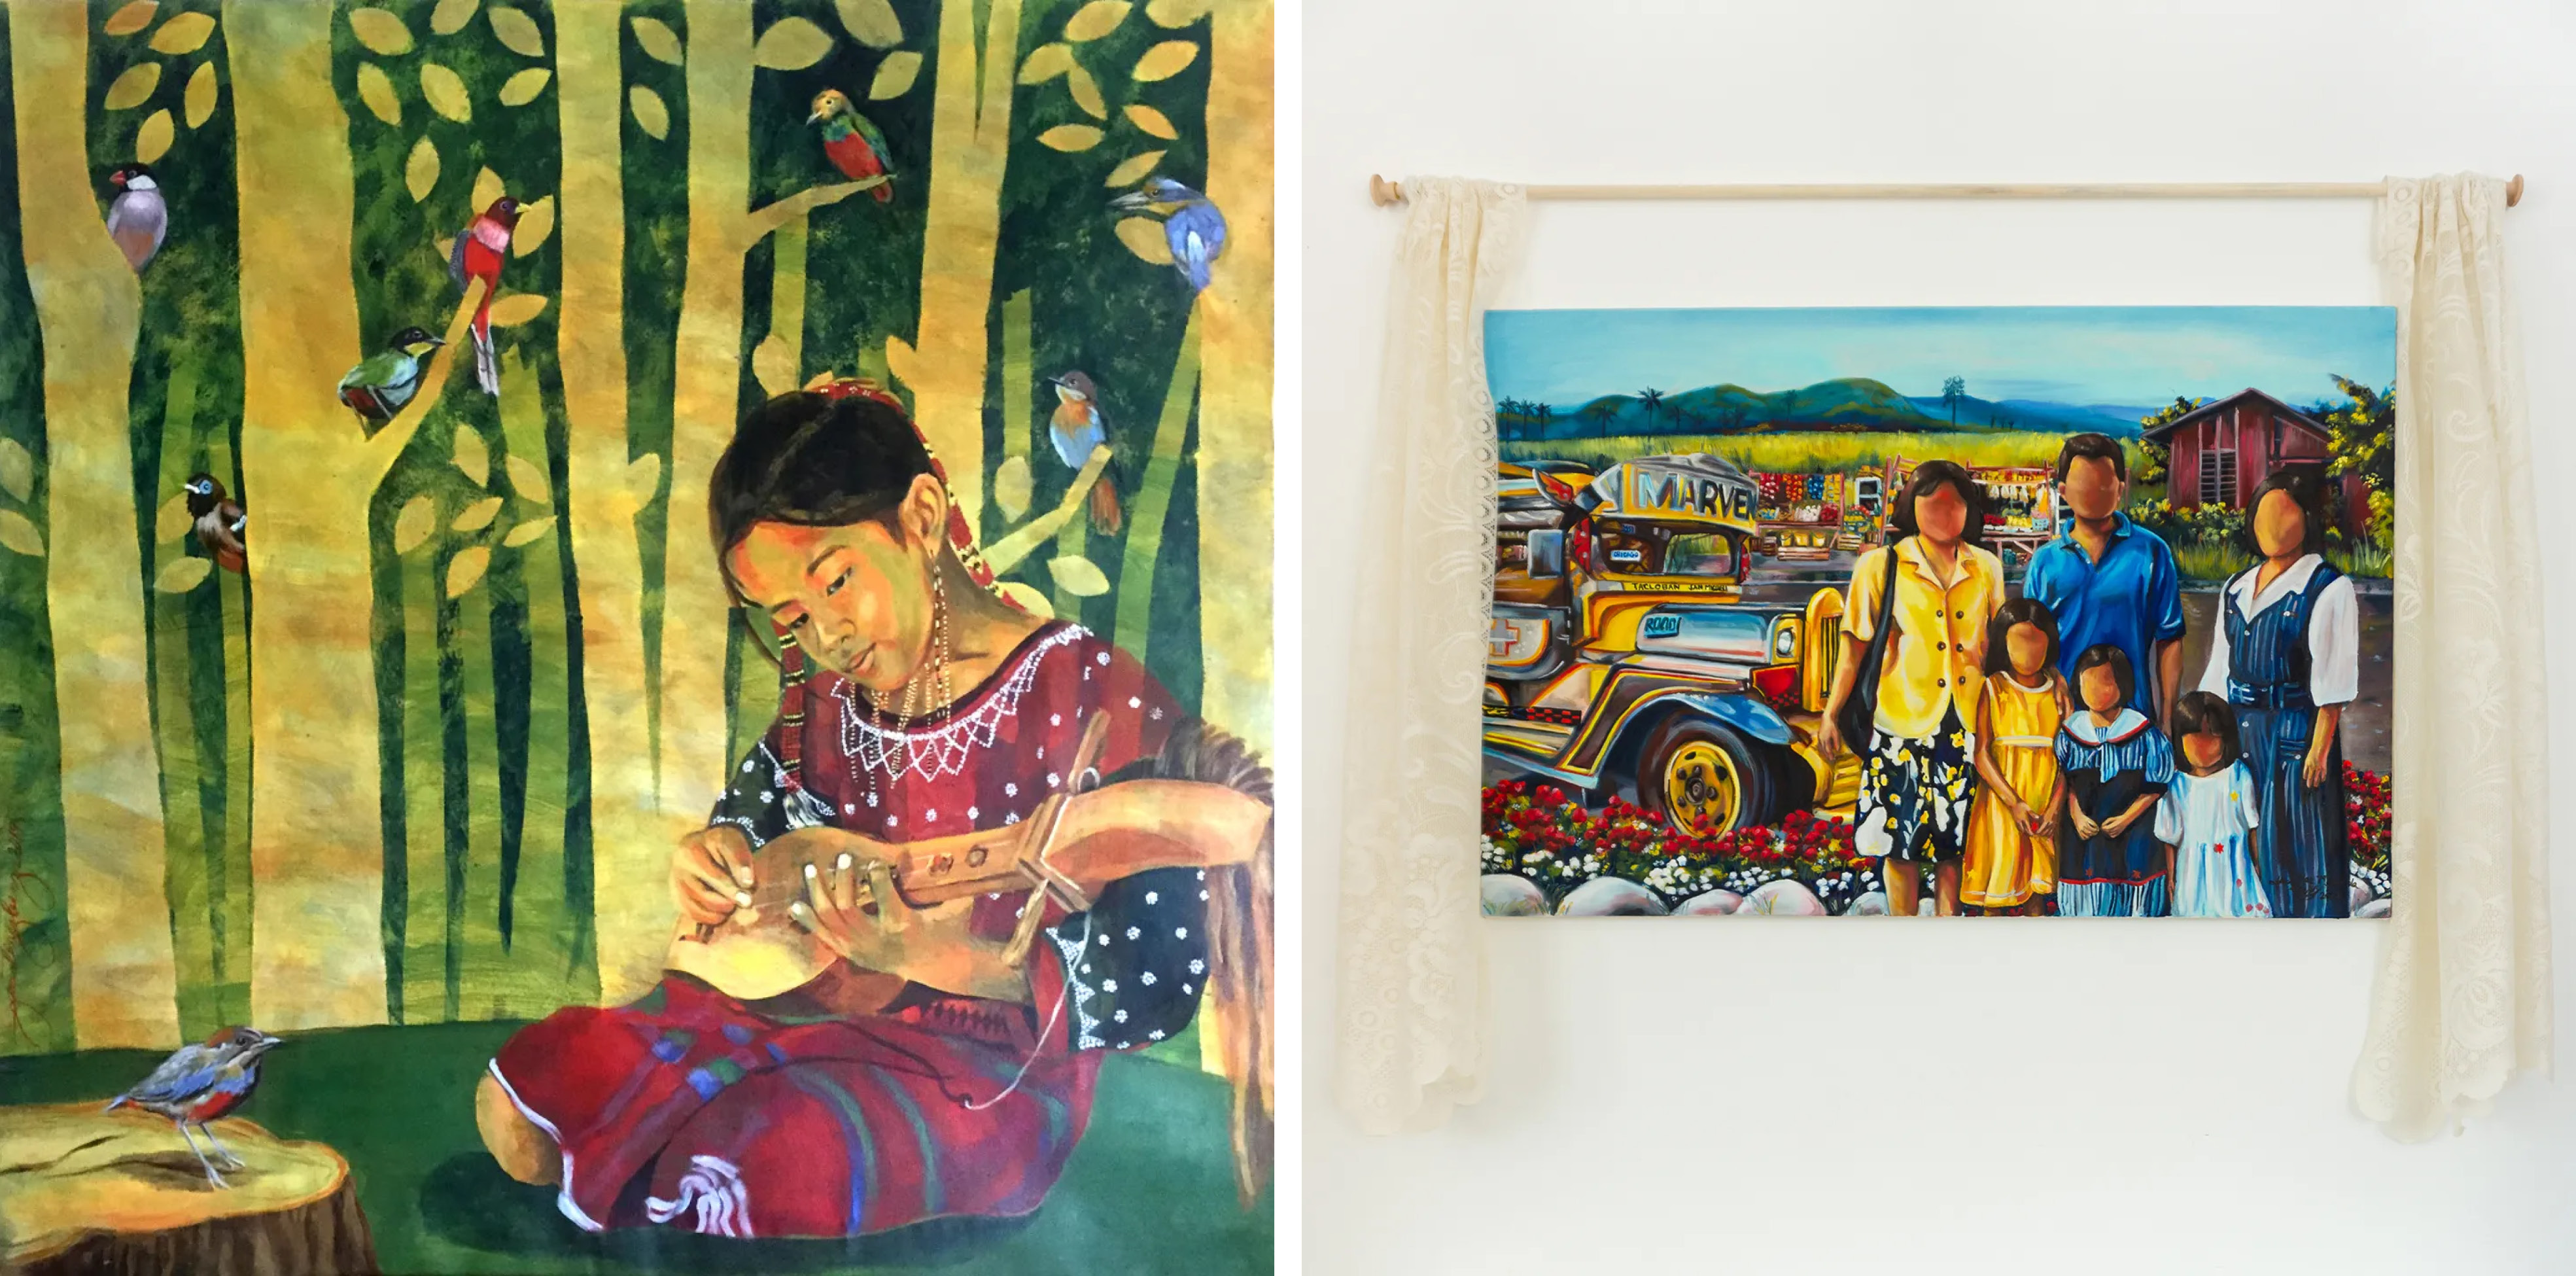 Web header image for "Sinag: Ray Of Light" exhibition, featuring two works (L to R): Geraldine Martinez Benz, "Huni"; Jessa Mendiola Mestiza, "The Life"